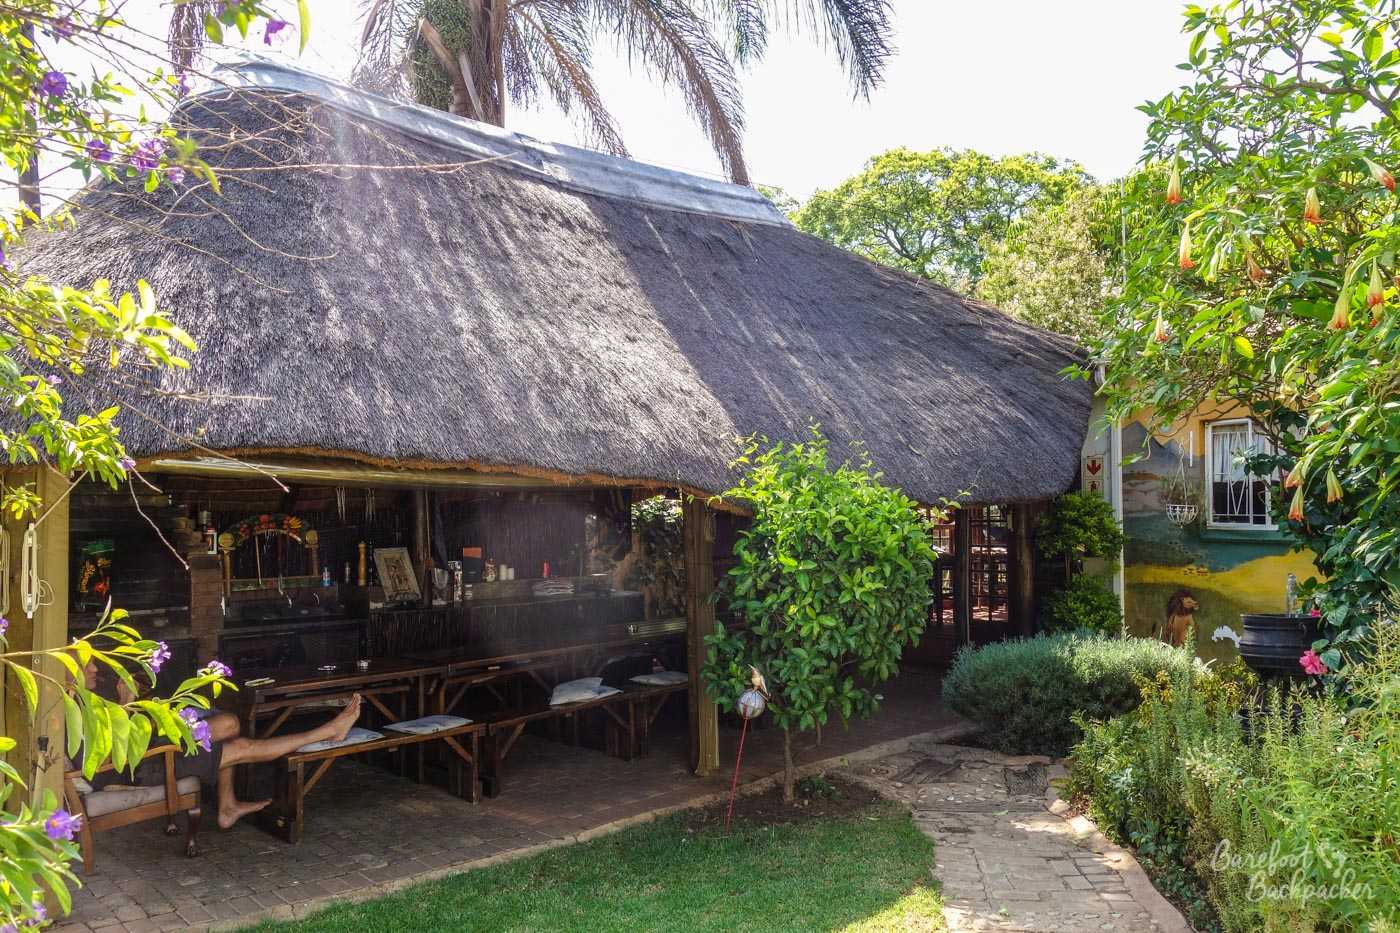 Thatched open-sided hut used as the outdoor dining area and braai in the Pretoria hostel.